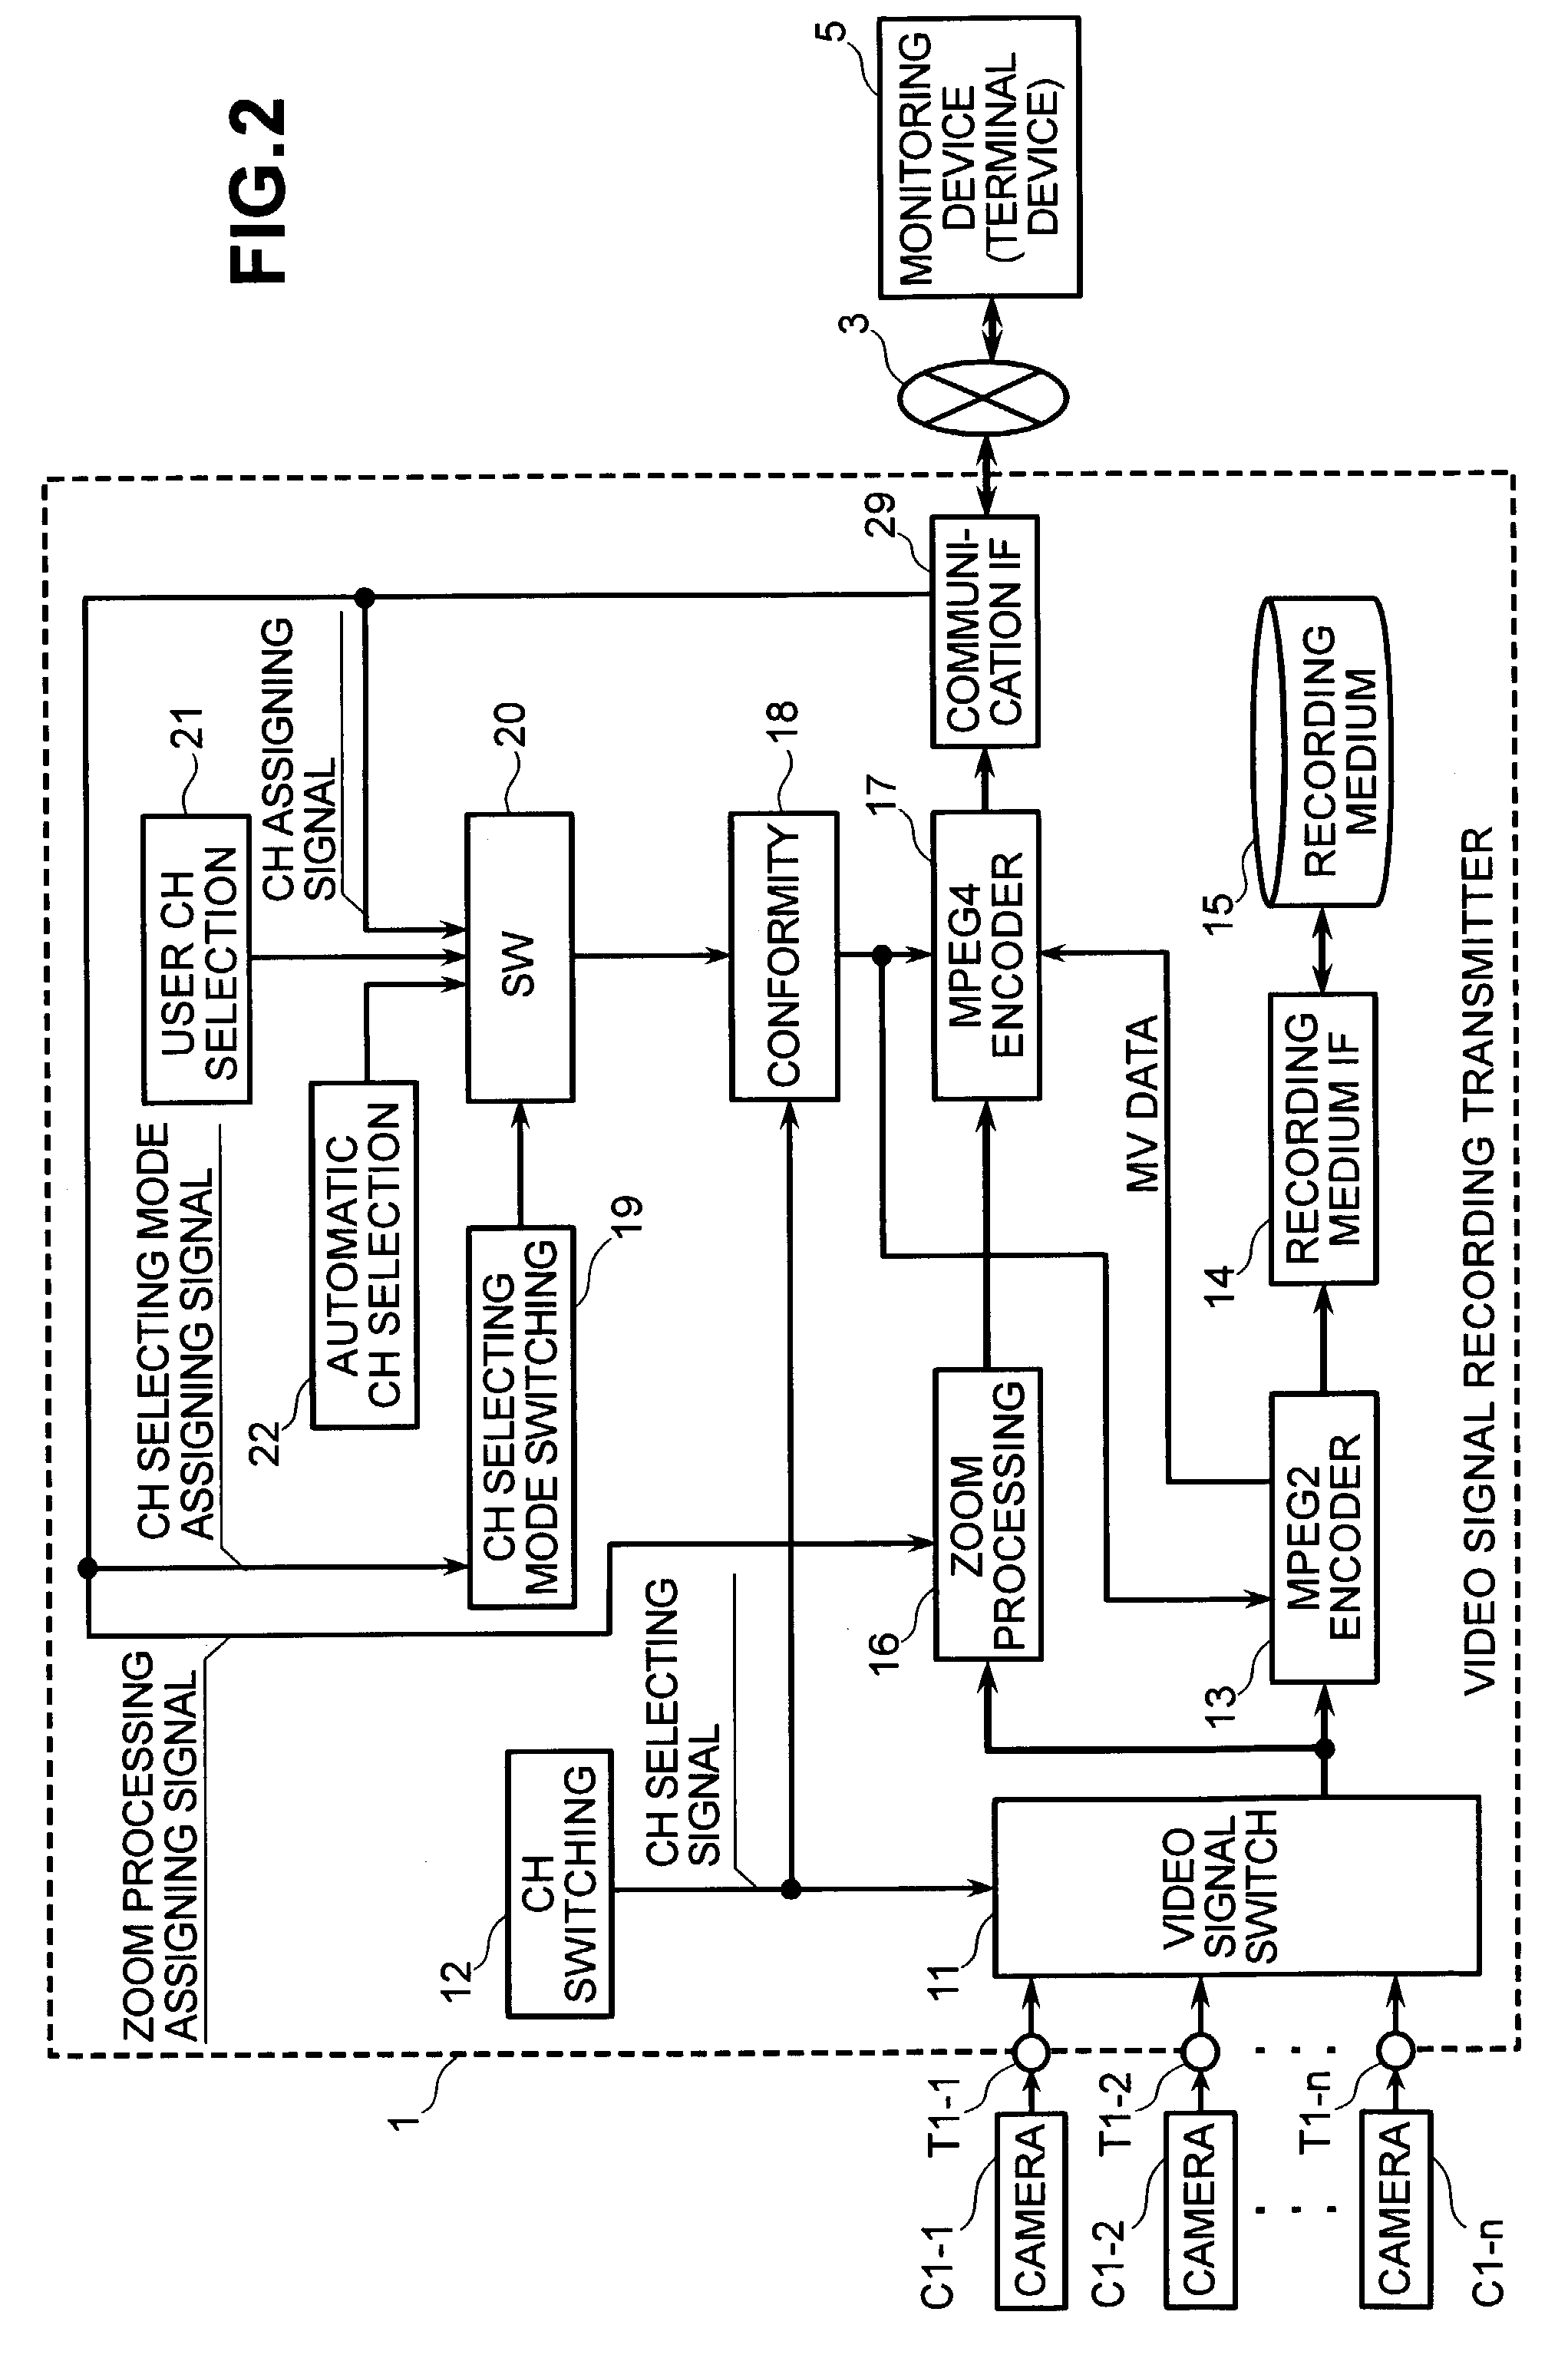 Moving picture recording and sending device having zoom processing capability